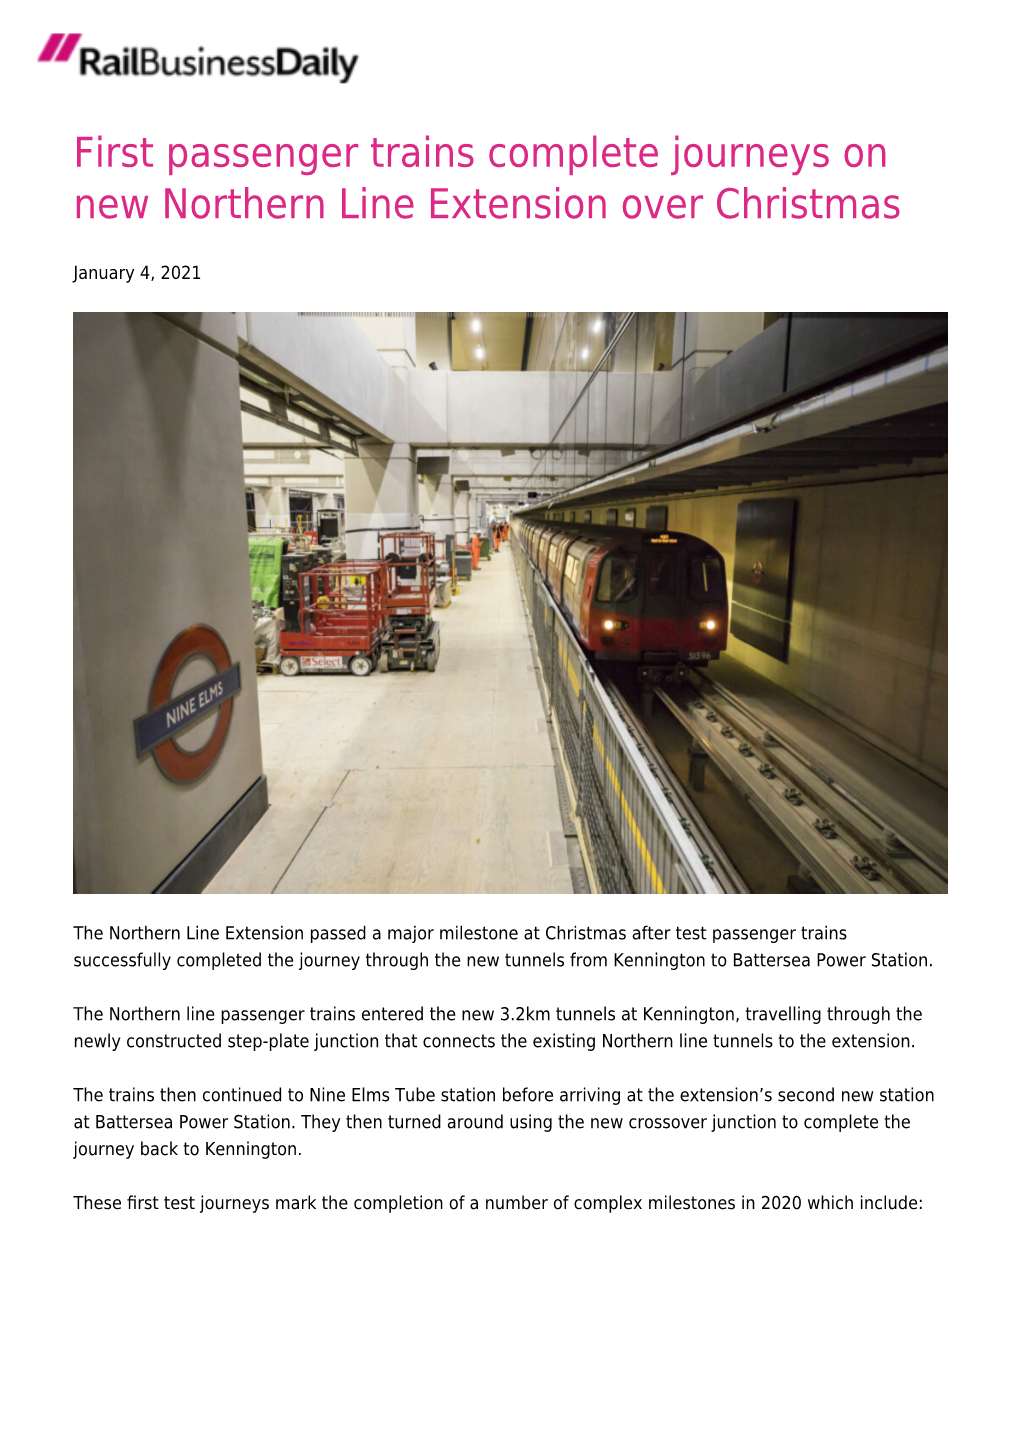 First Passenger Trains Complete Journeys on New Northern Line Extension Over Christmas